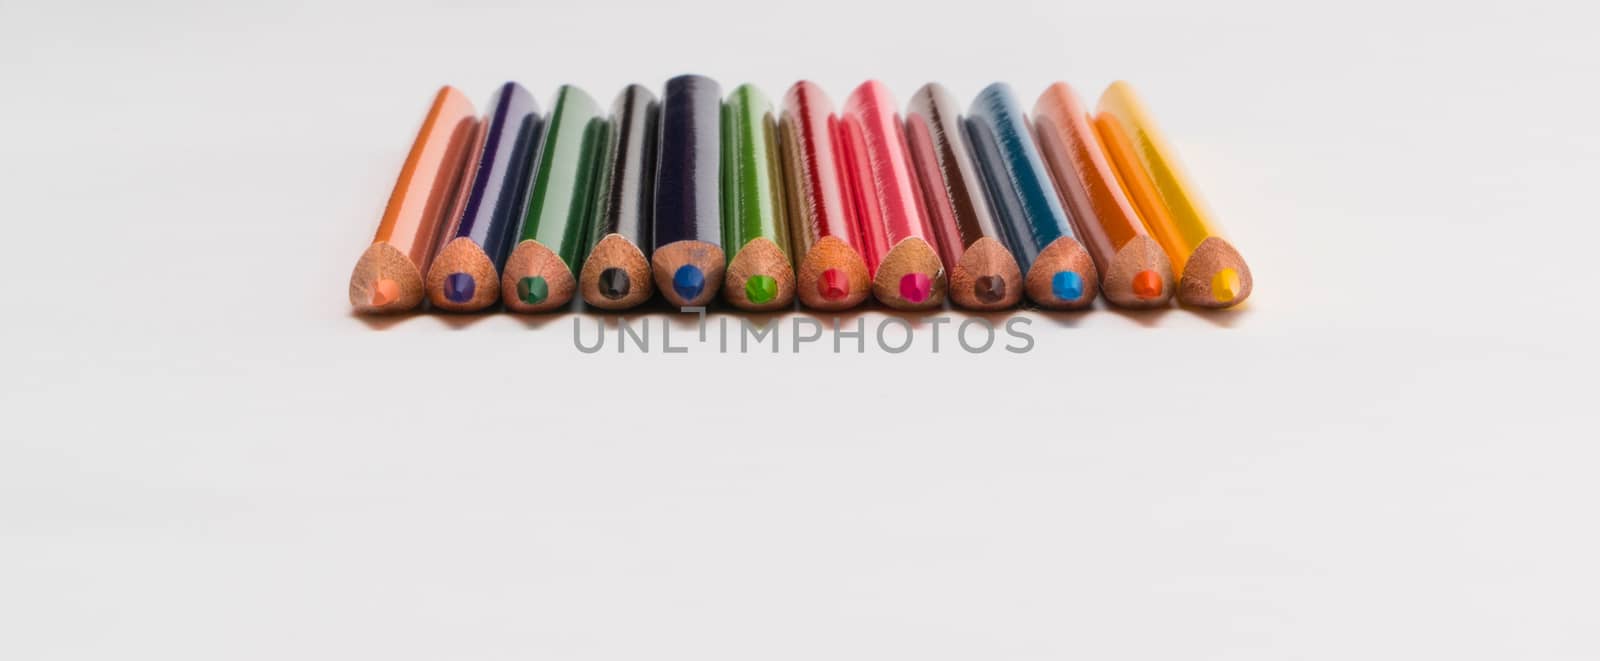 pencils on white background by A_Karim